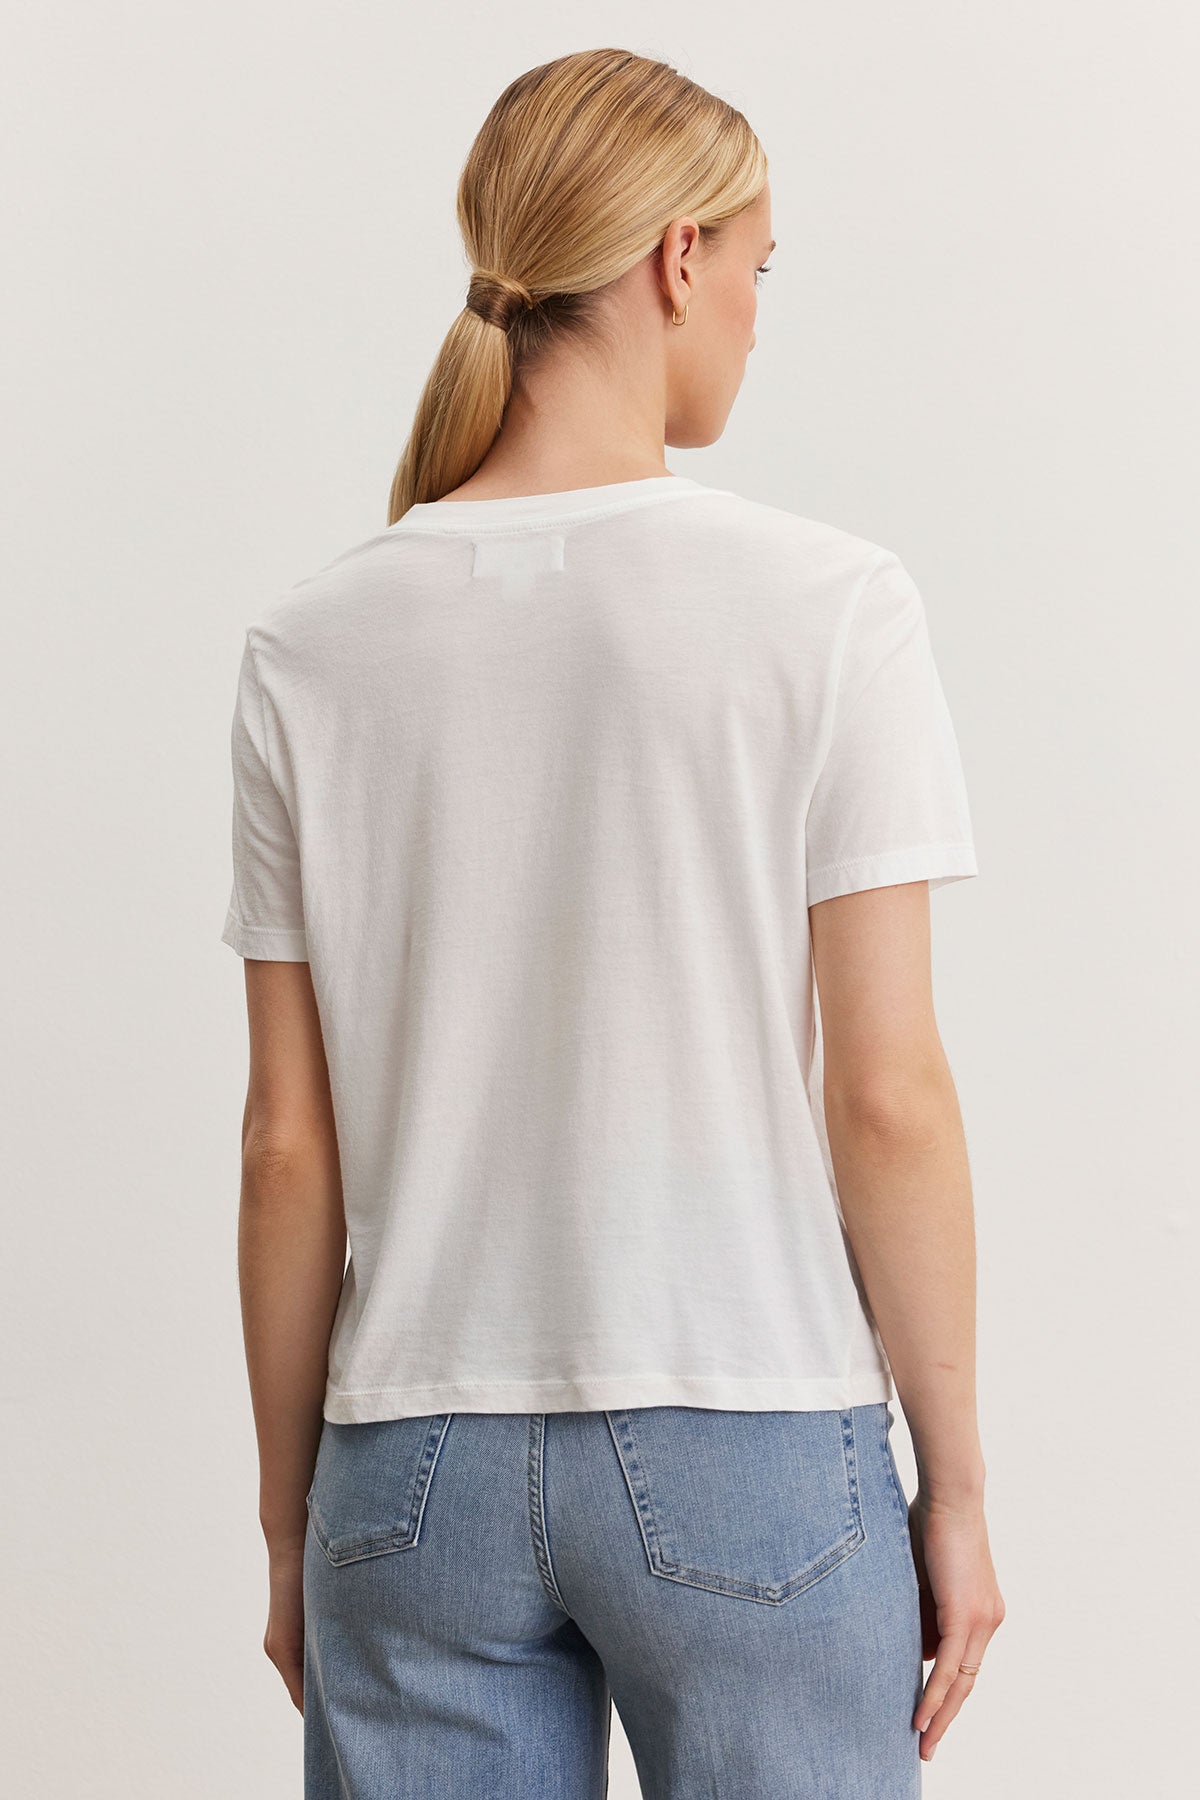 Rear view of a woman with a ponytail wearing a Velvet by Graham & Spencer RYAN TEE in whisper cotton fabric and blue jeans, standing against a light background.-36998721831105